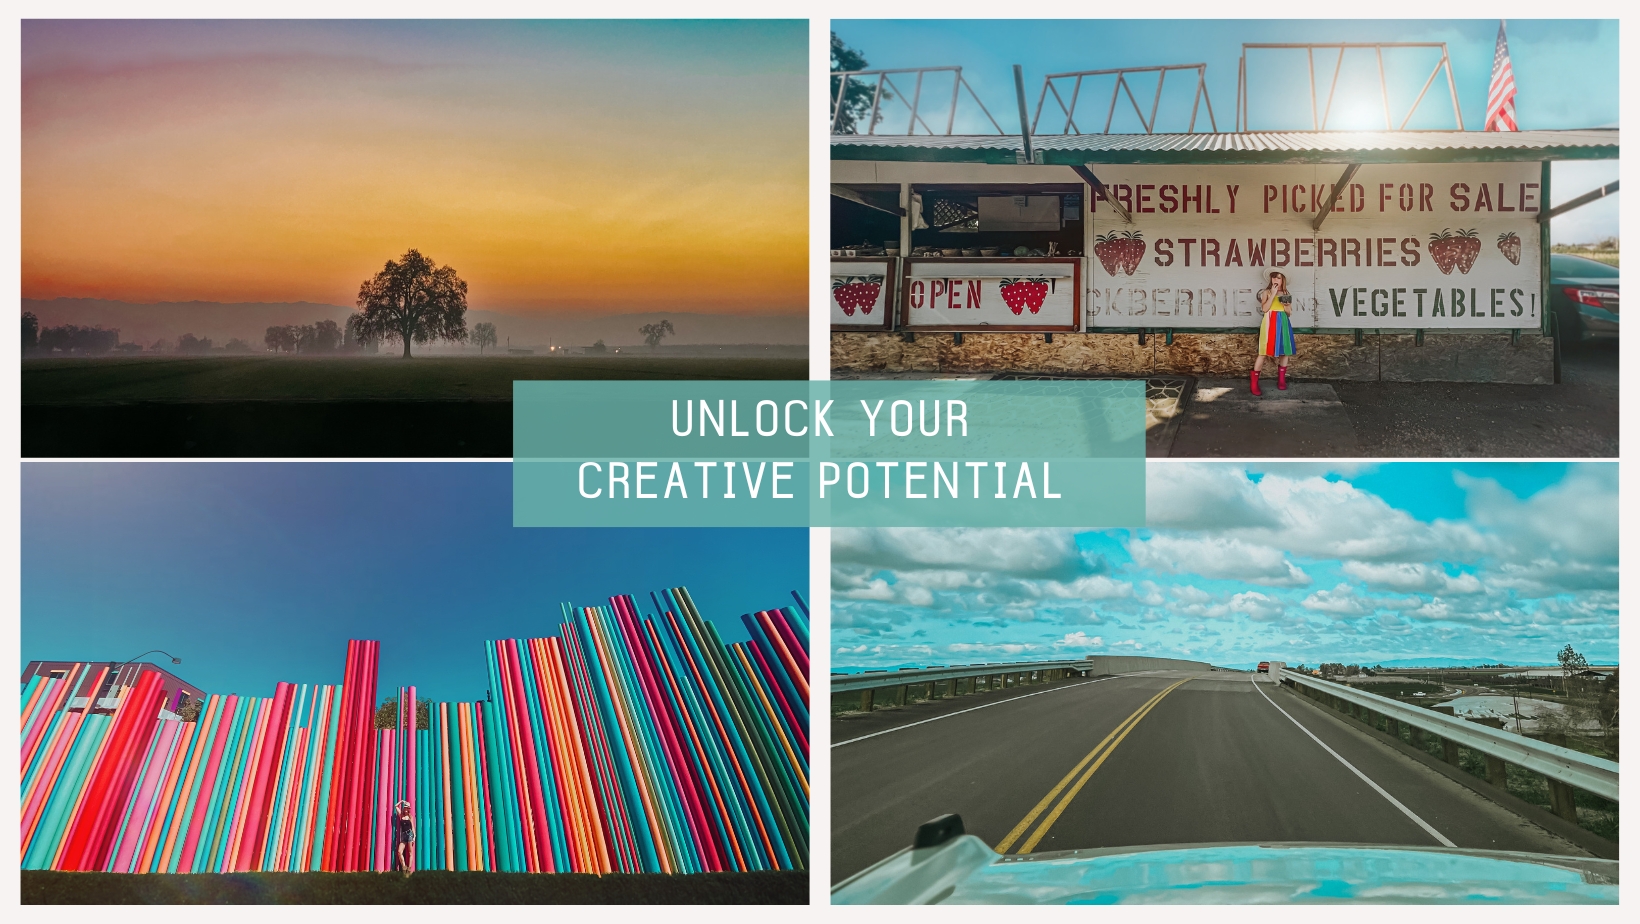 Unlock the Creative Potential of Mobile Photography